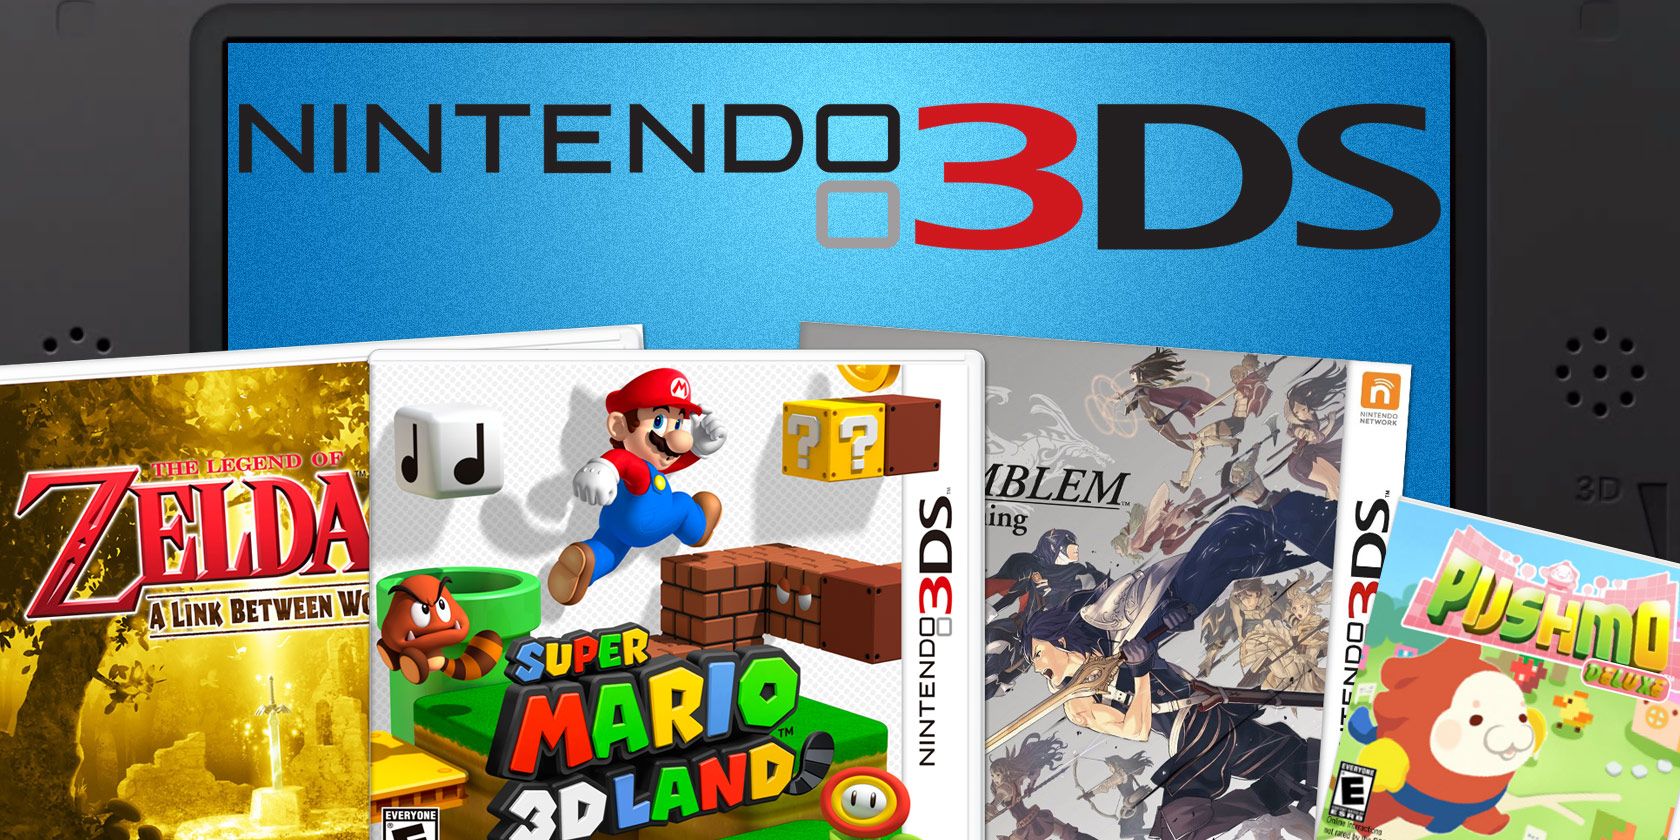 4 Nintendo 3DS Games That Make Incredible Use Of The 3D Tech